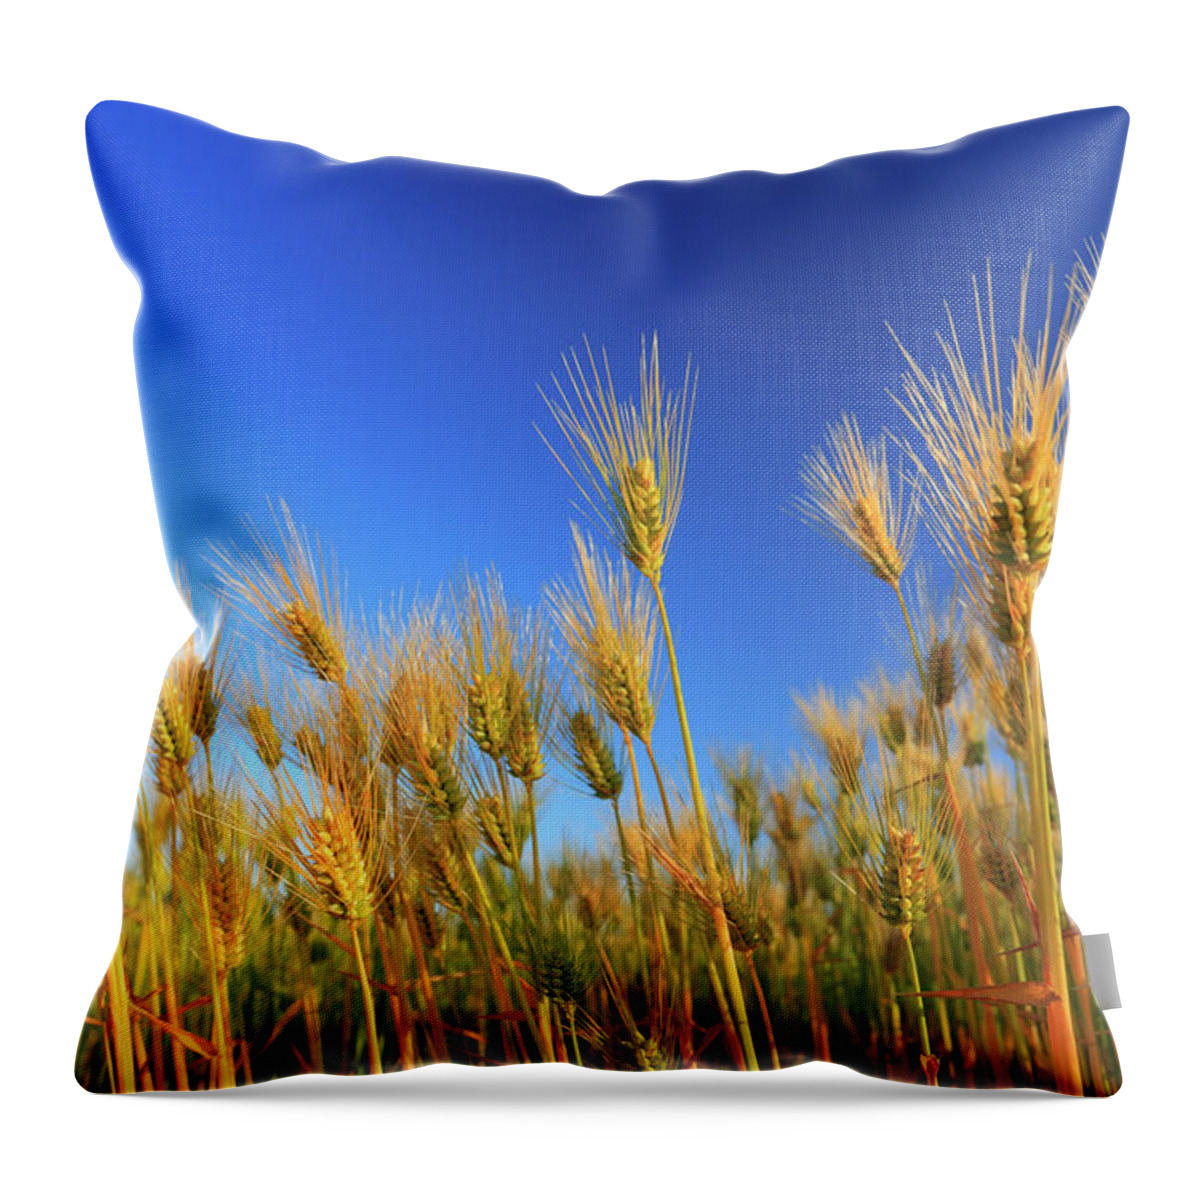 Tranquility Throw Pillow featuring the photograph Cultivated Farmland by Imagewerks